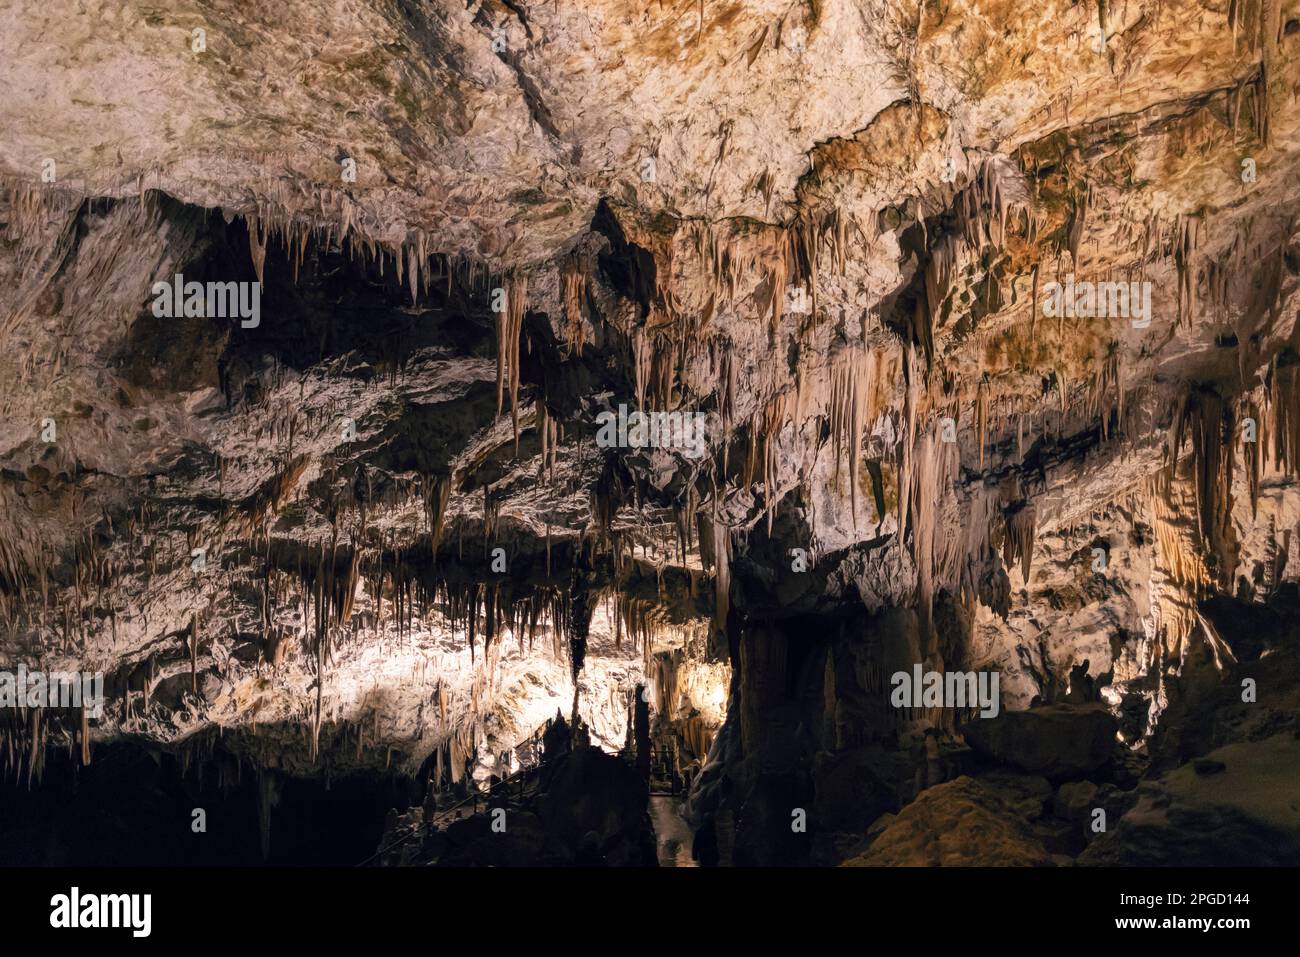 Stalactites and stalagmite form in dripstone cave Stock Photo